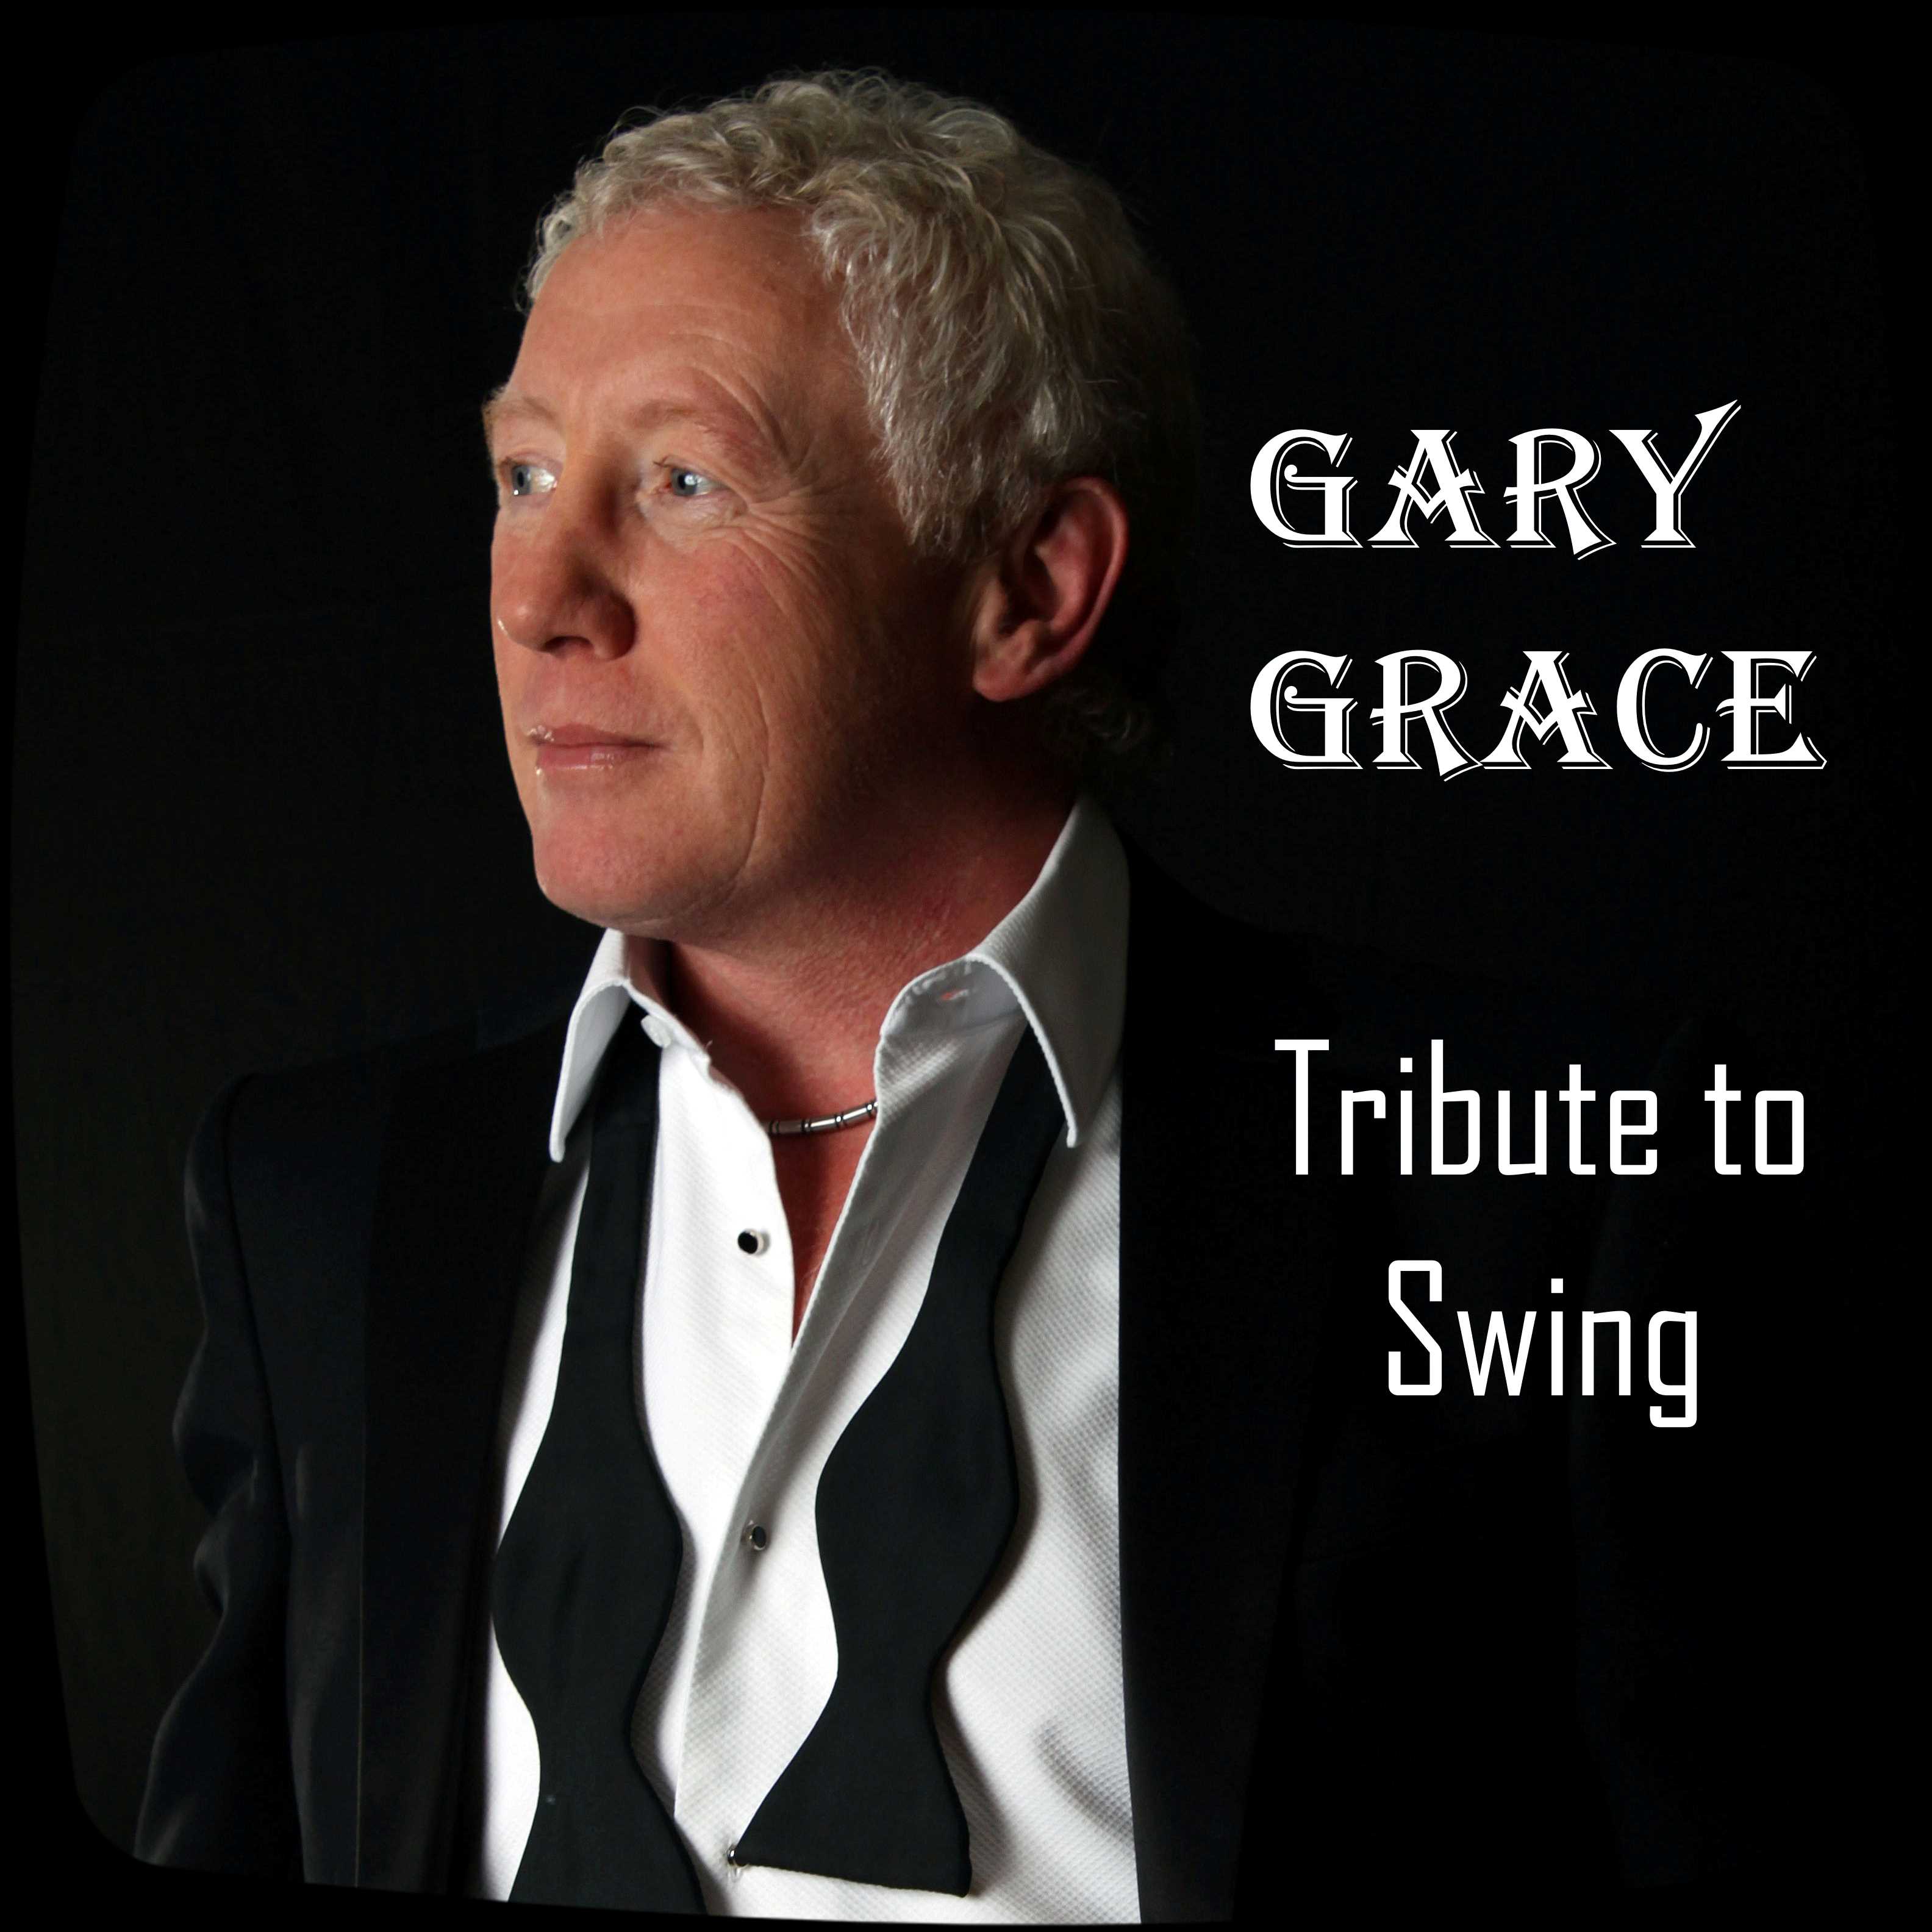 Gary Grace Tribute to Swing Male Vocalist South Yorkshire